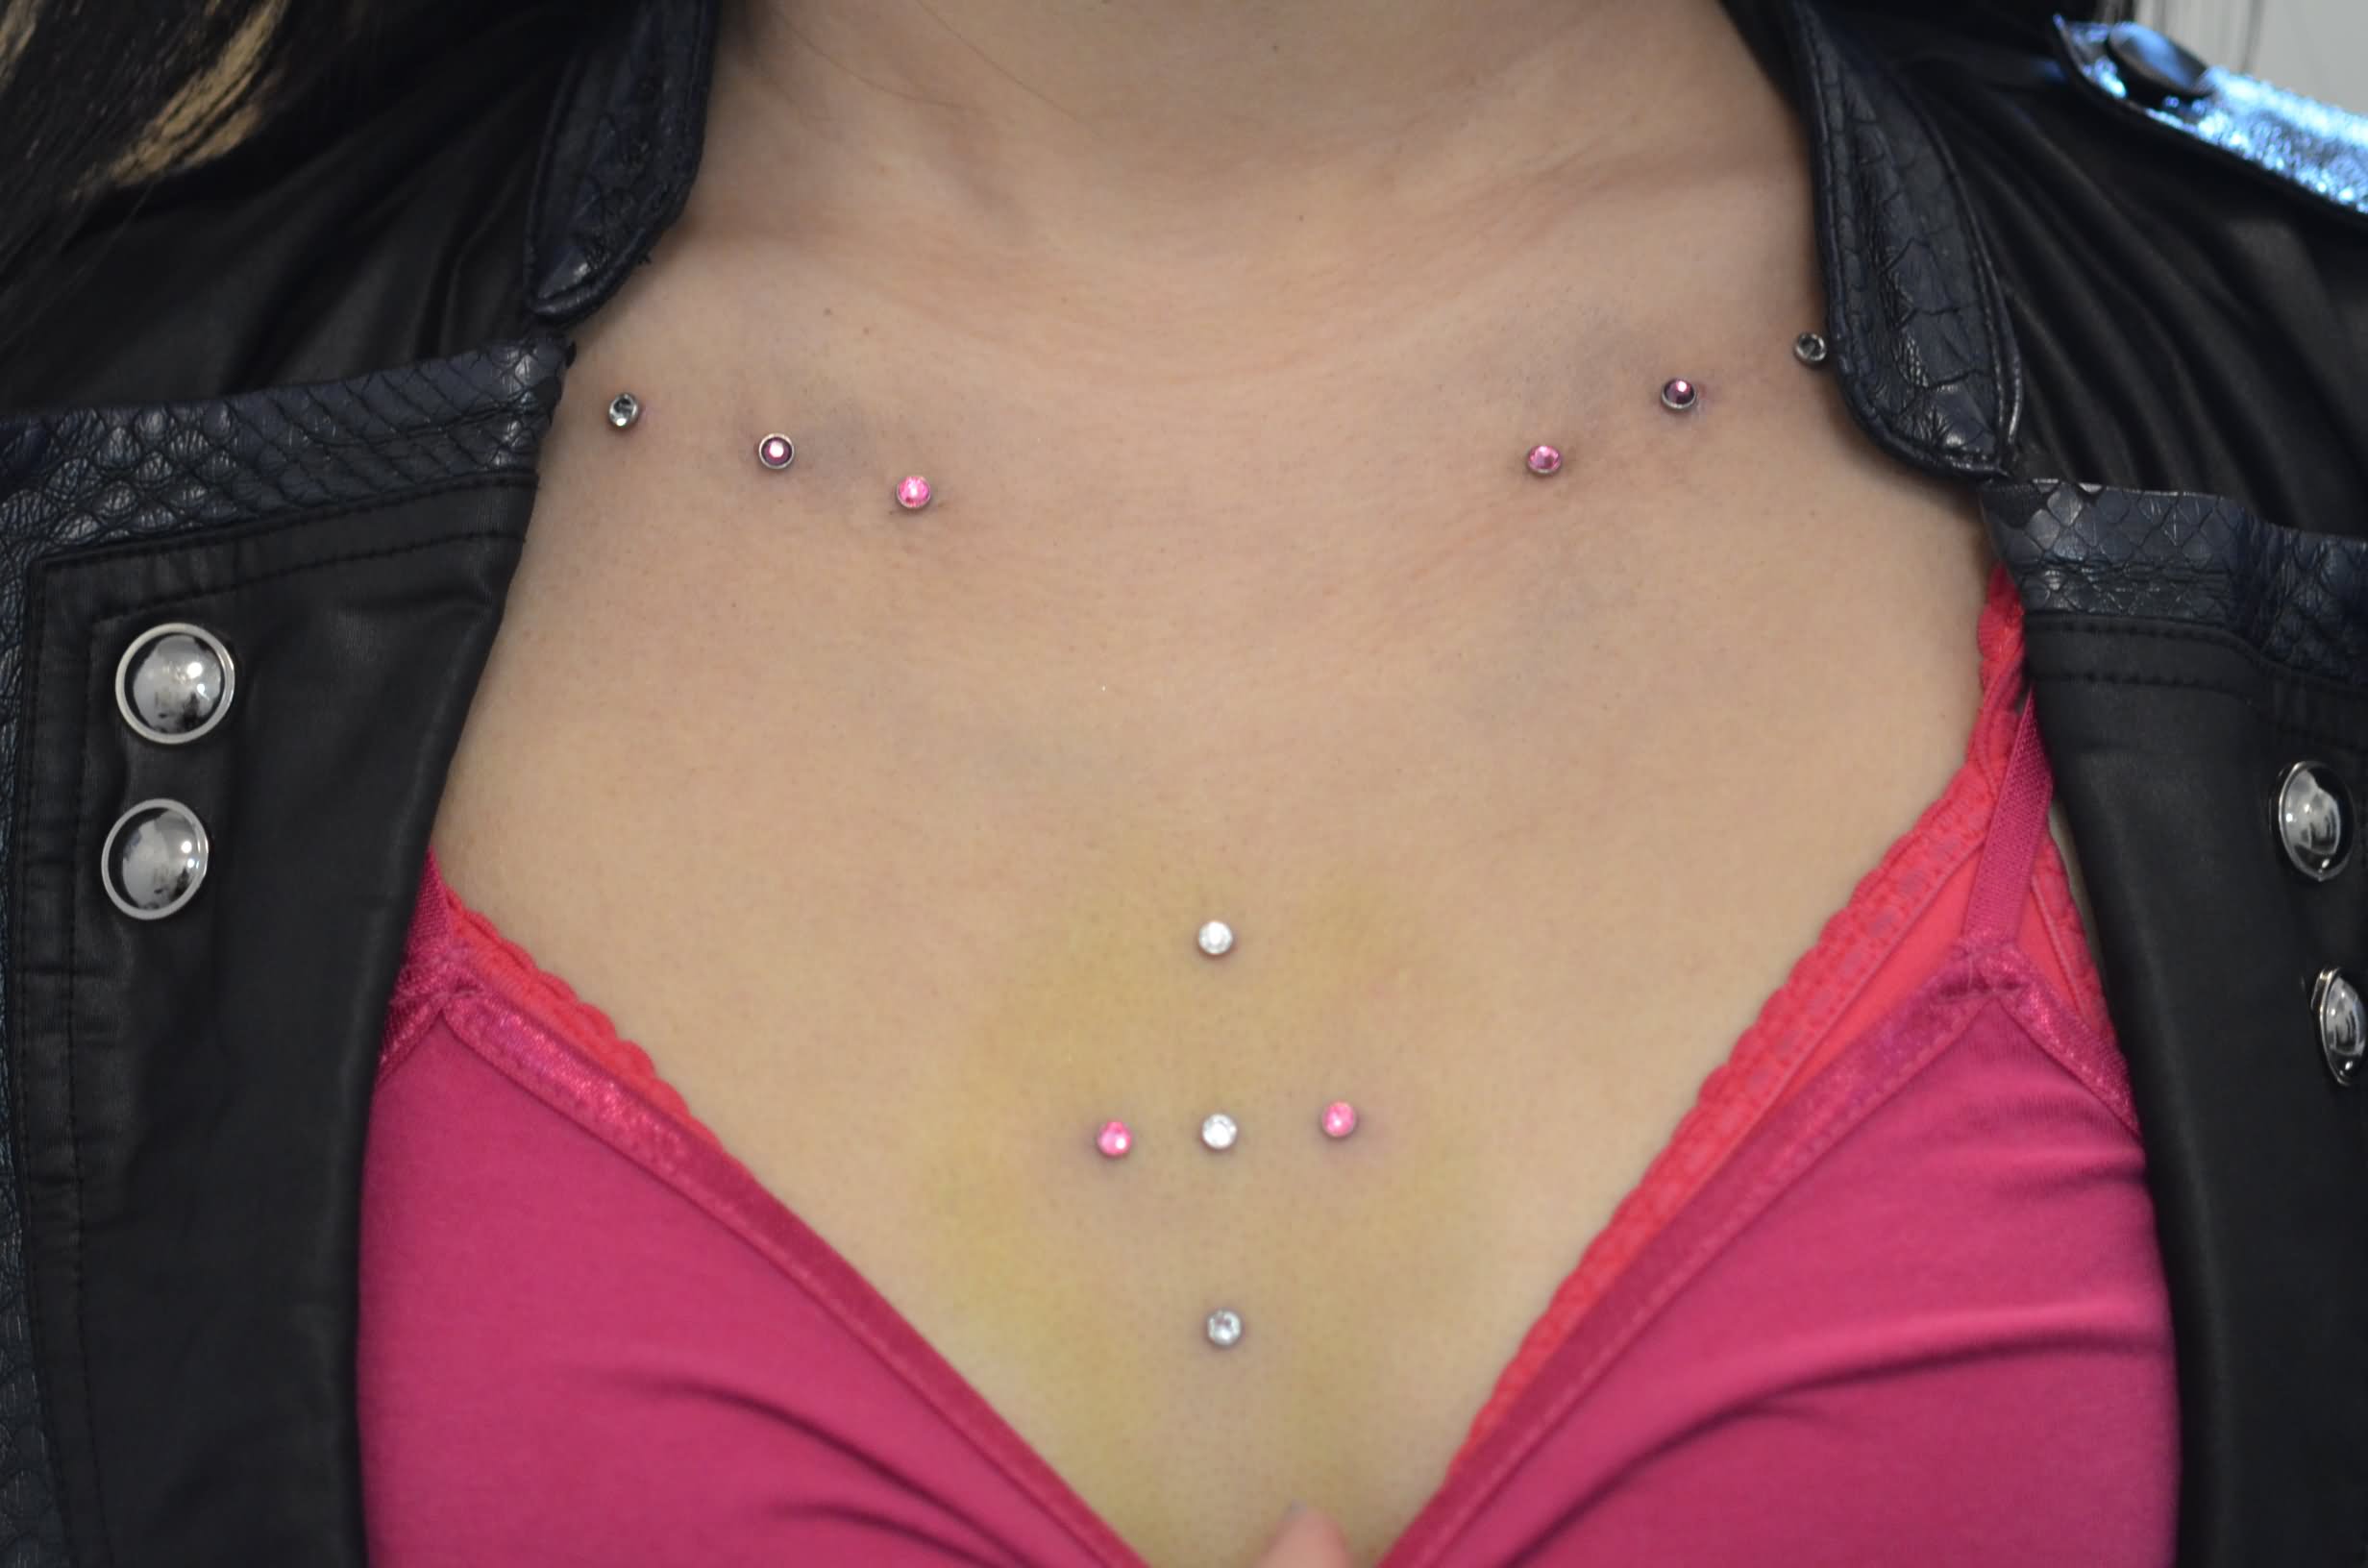 Silver And Pink Dermal Anchors Piercing On Collar Bones